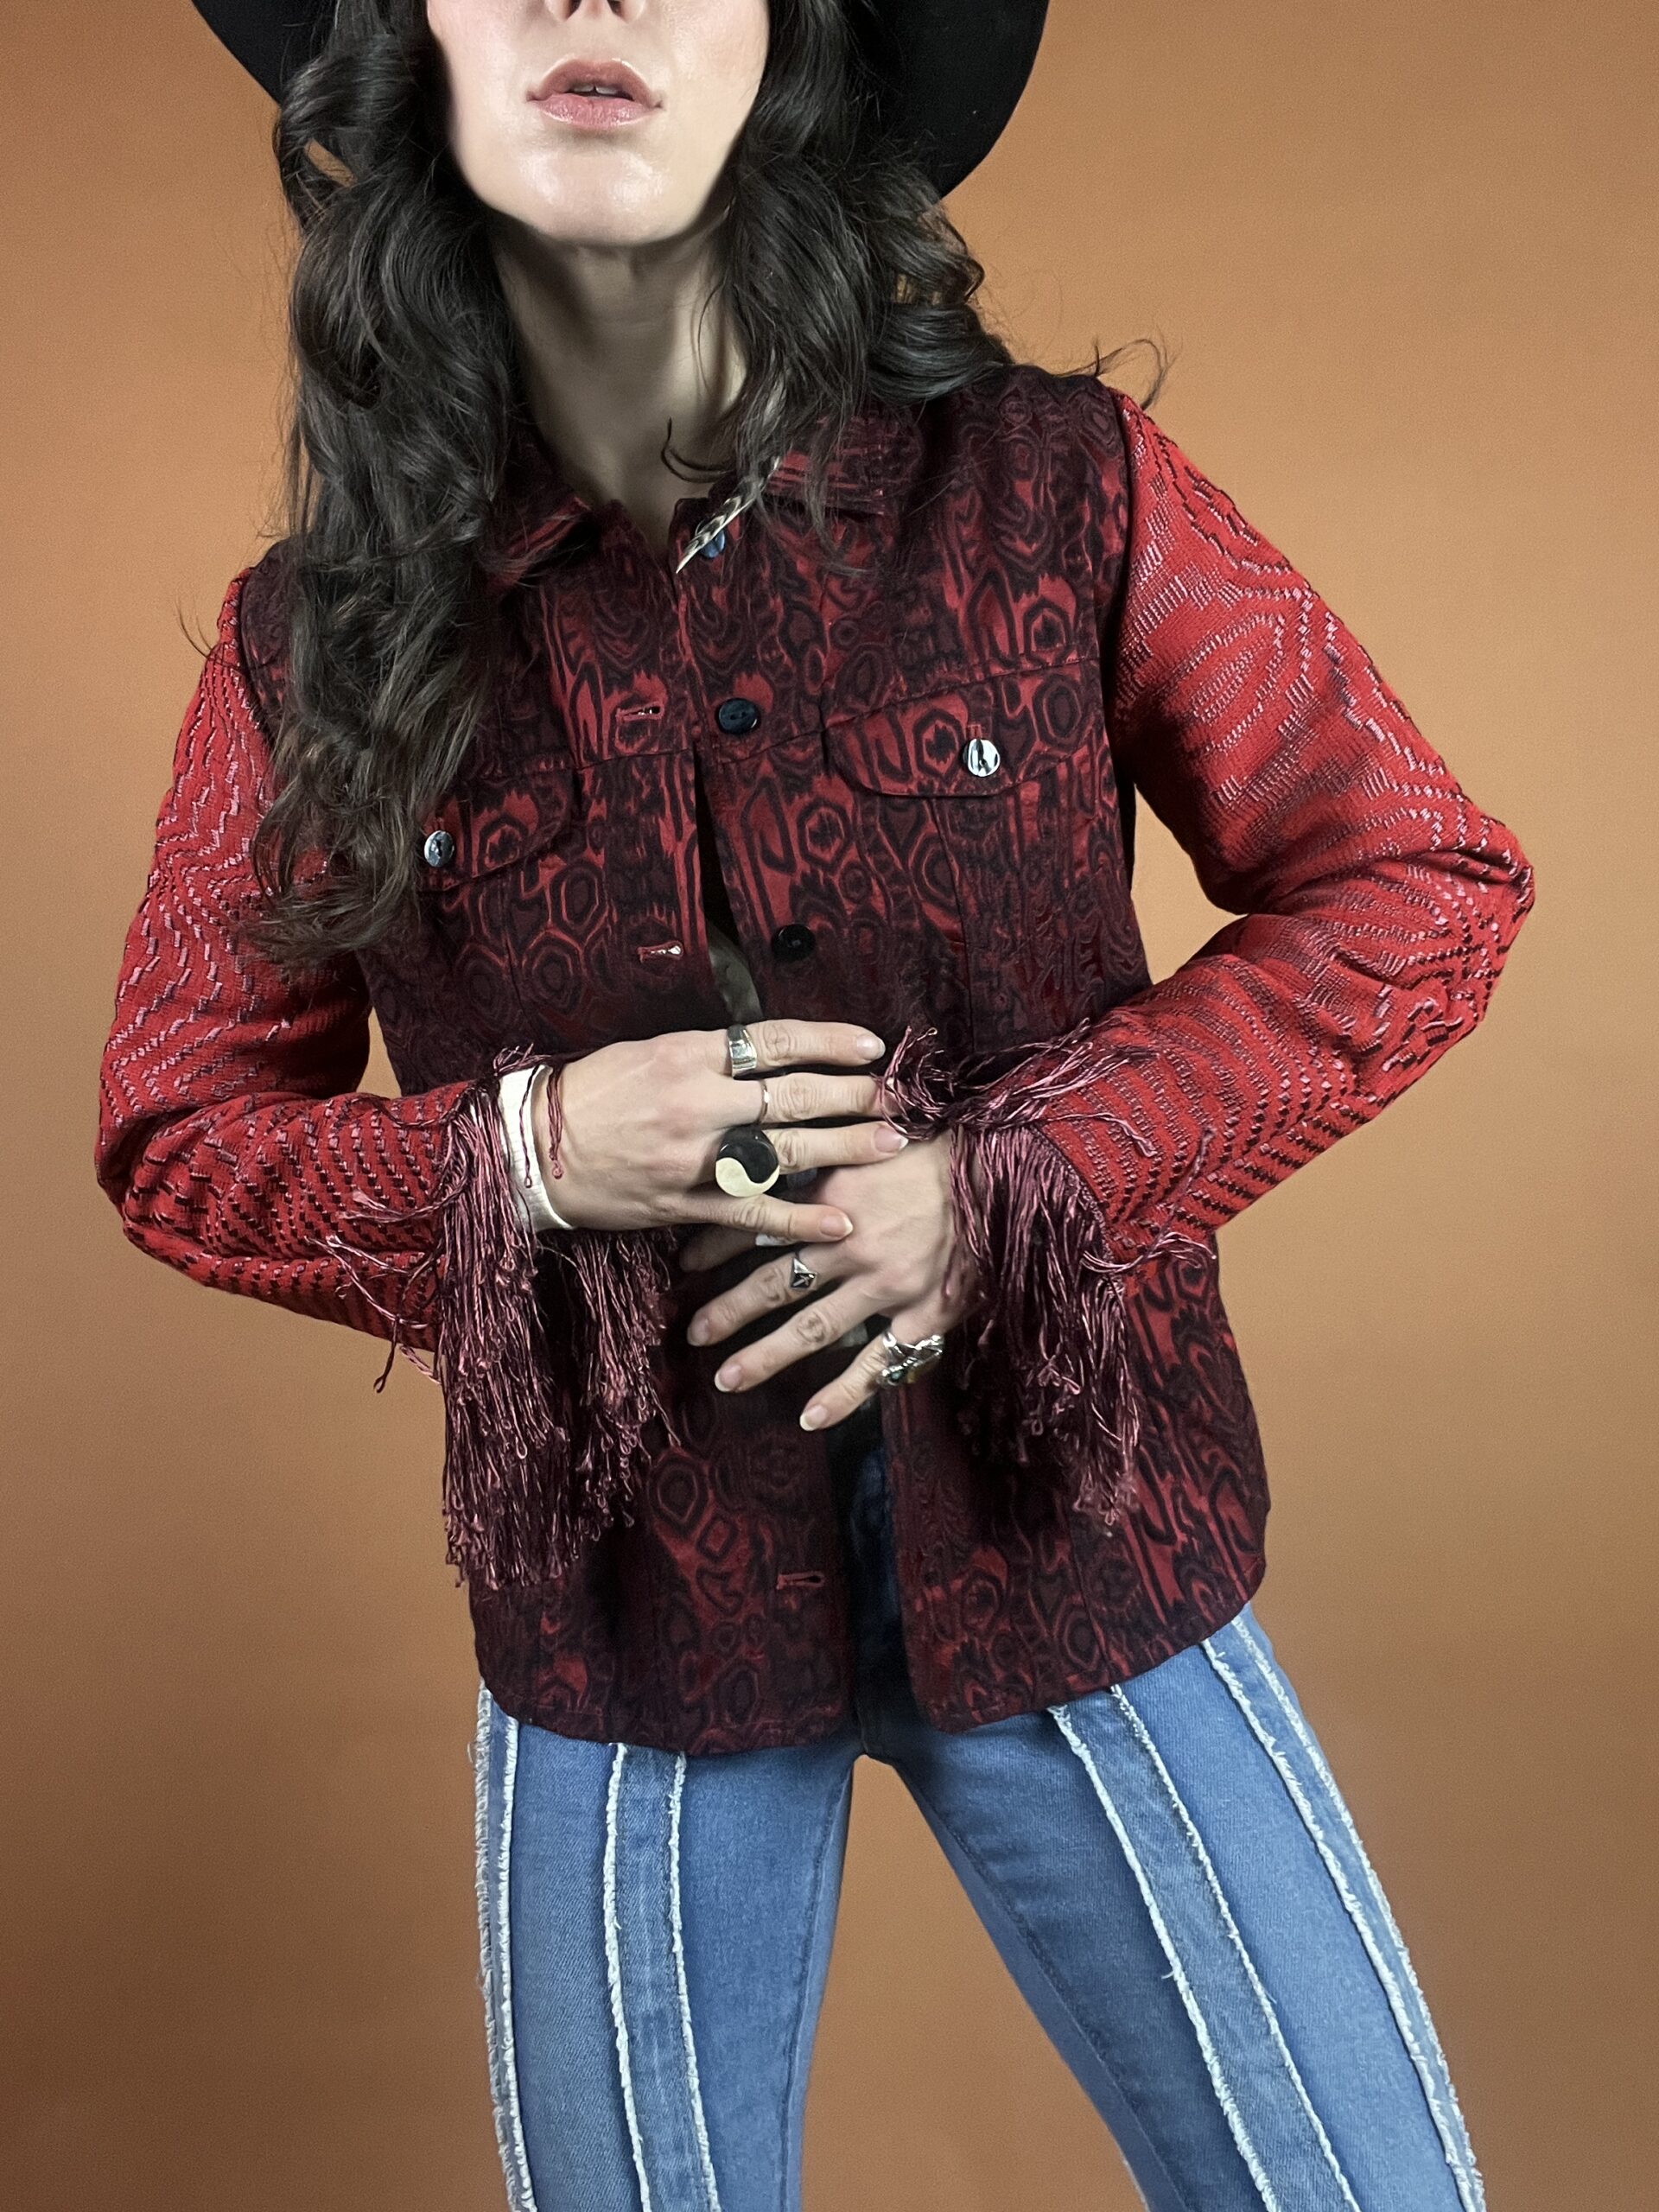 A woman in a hat and jeans wearing a red and black paisley jacket.